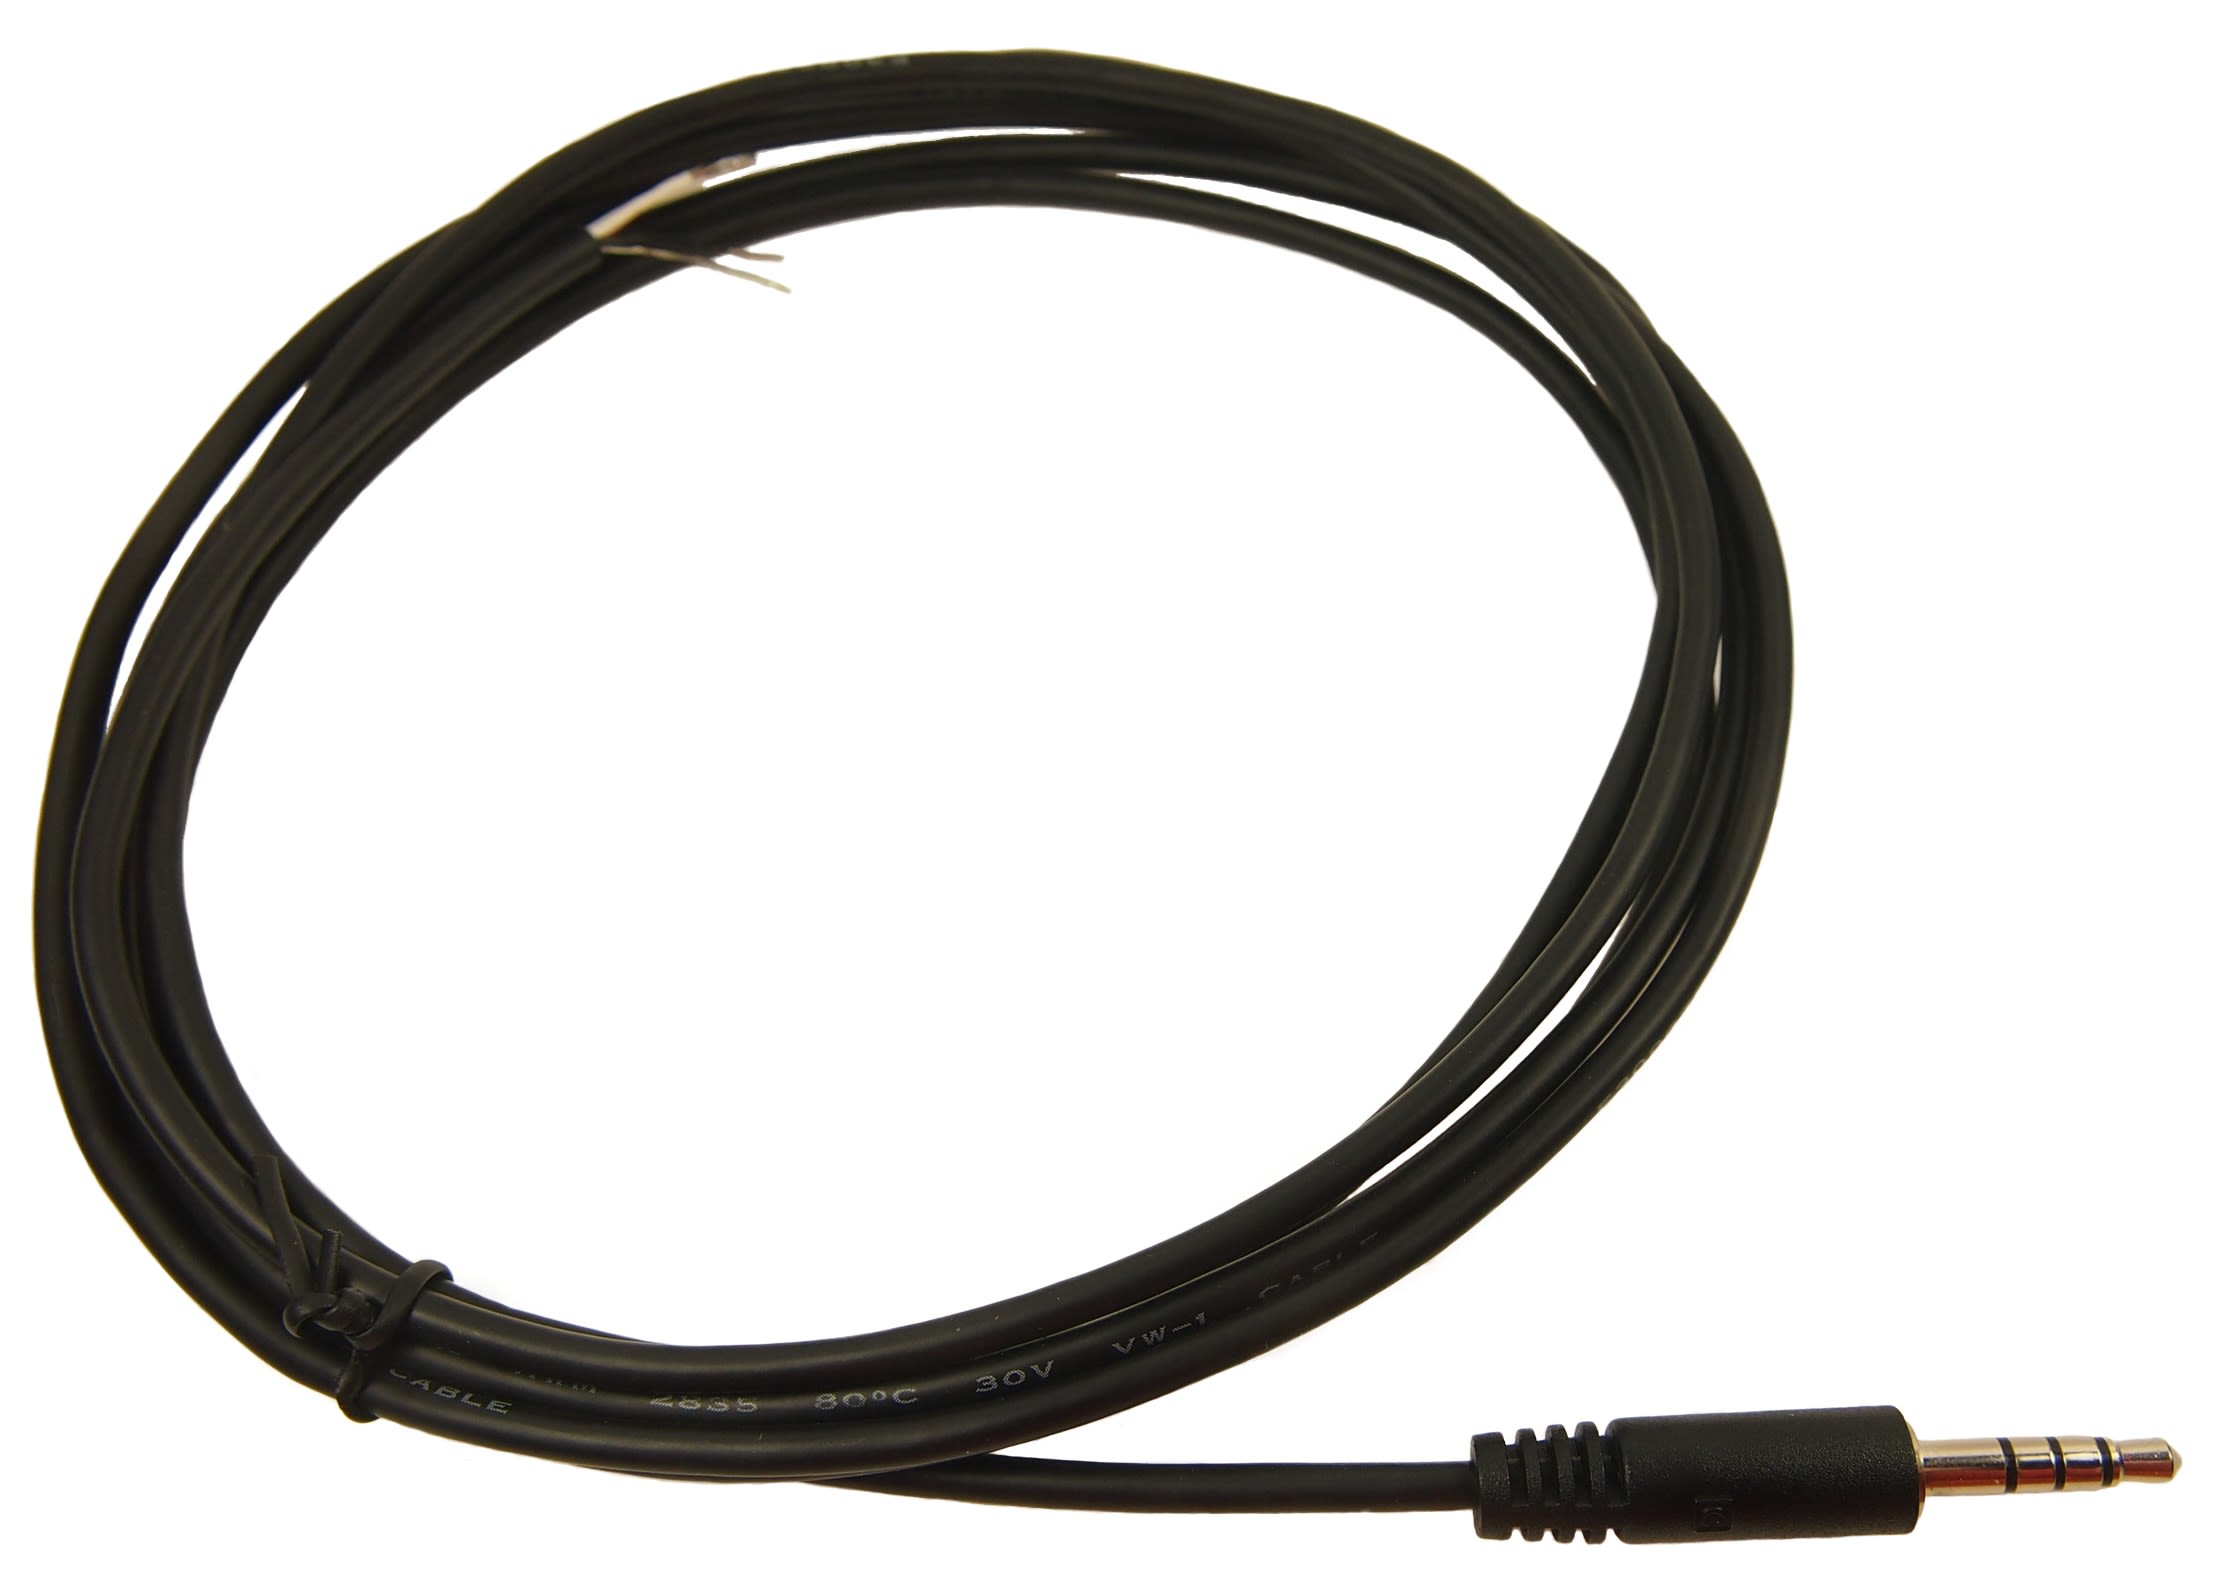 RS PRO Male 3.5mm Stereo Jack to Unterminated Aux Cable, Black, 2m